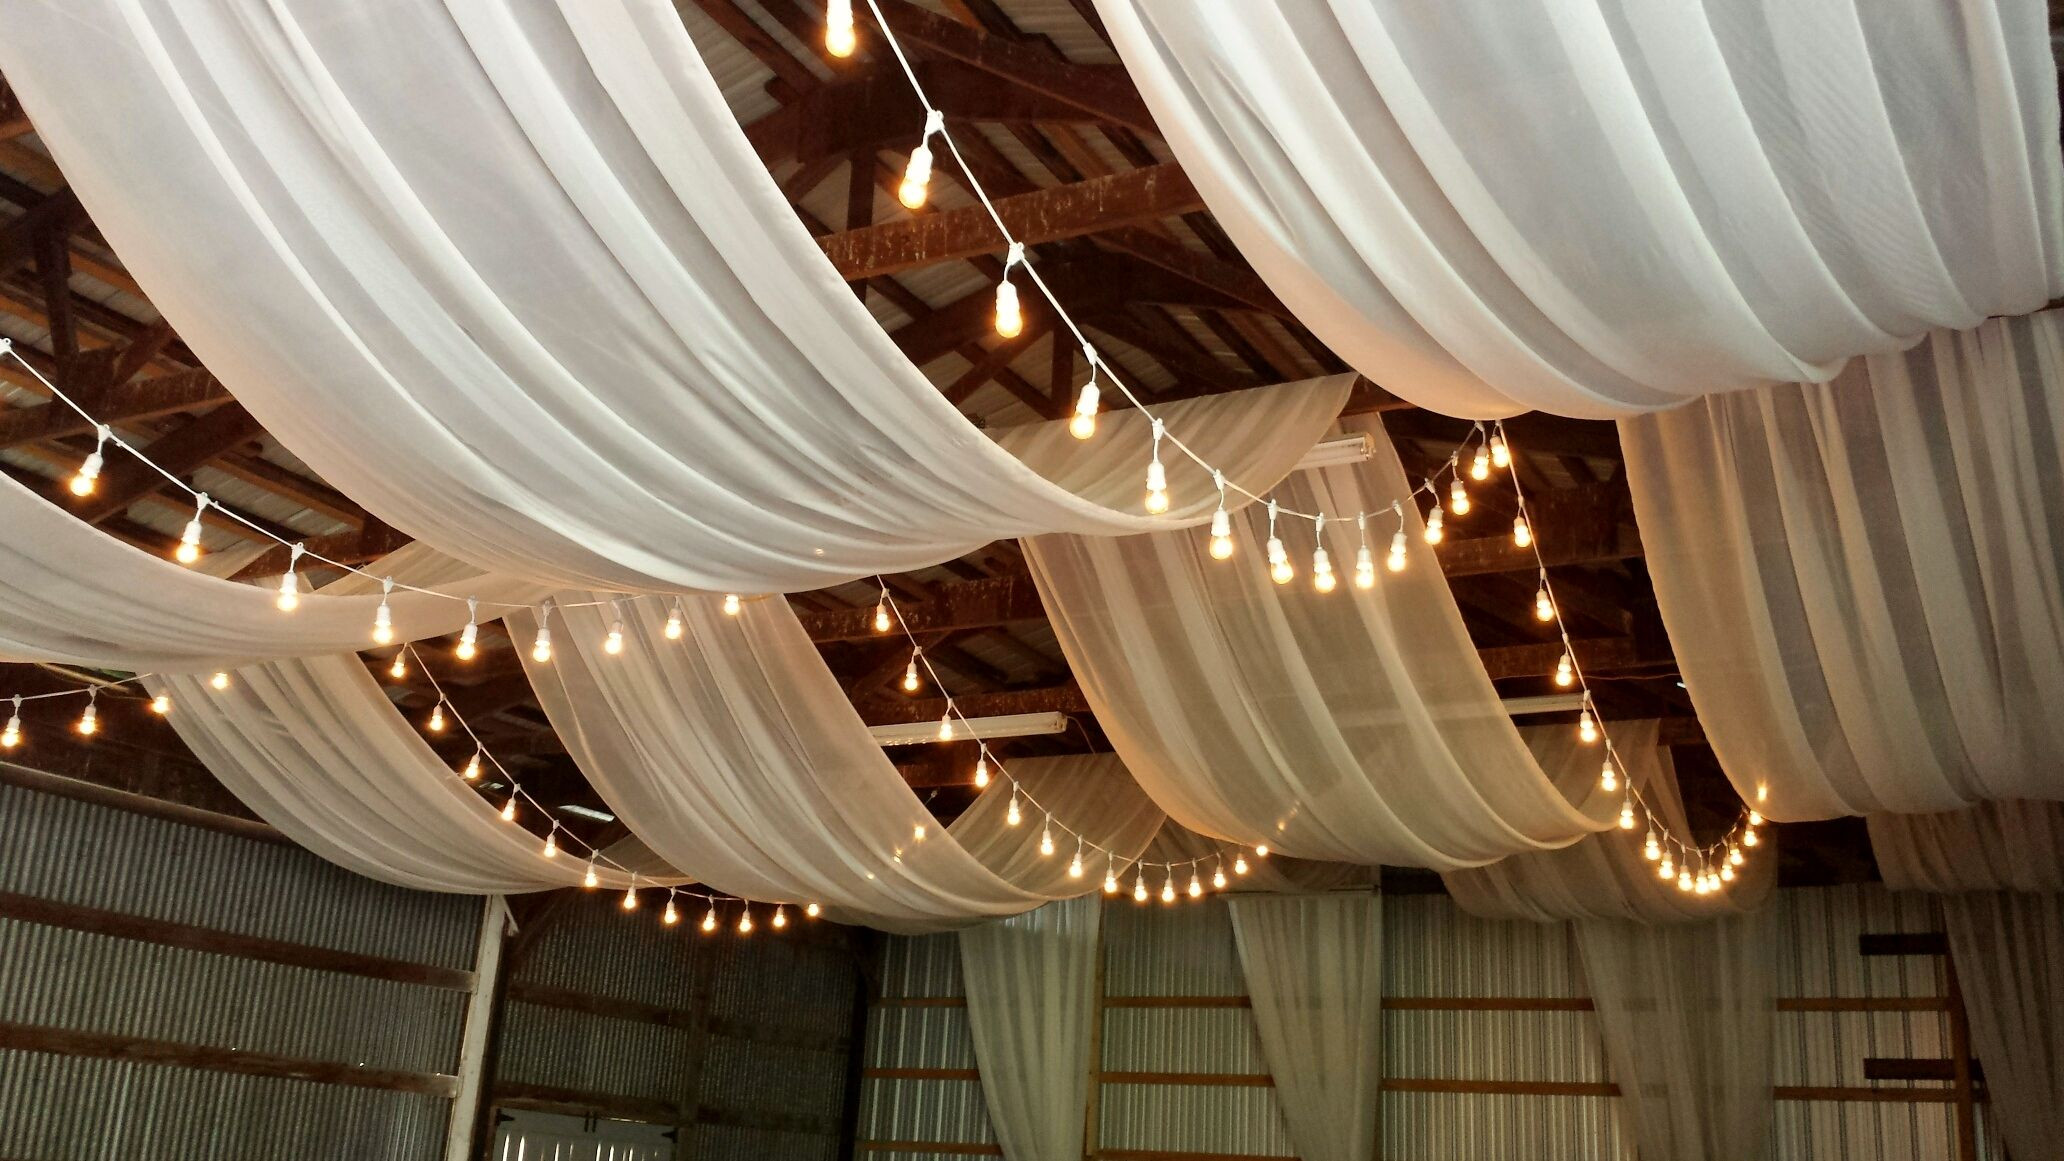 DIY Draping For Wedding
 Ceiling draping in a barn This makes a rustic wedding